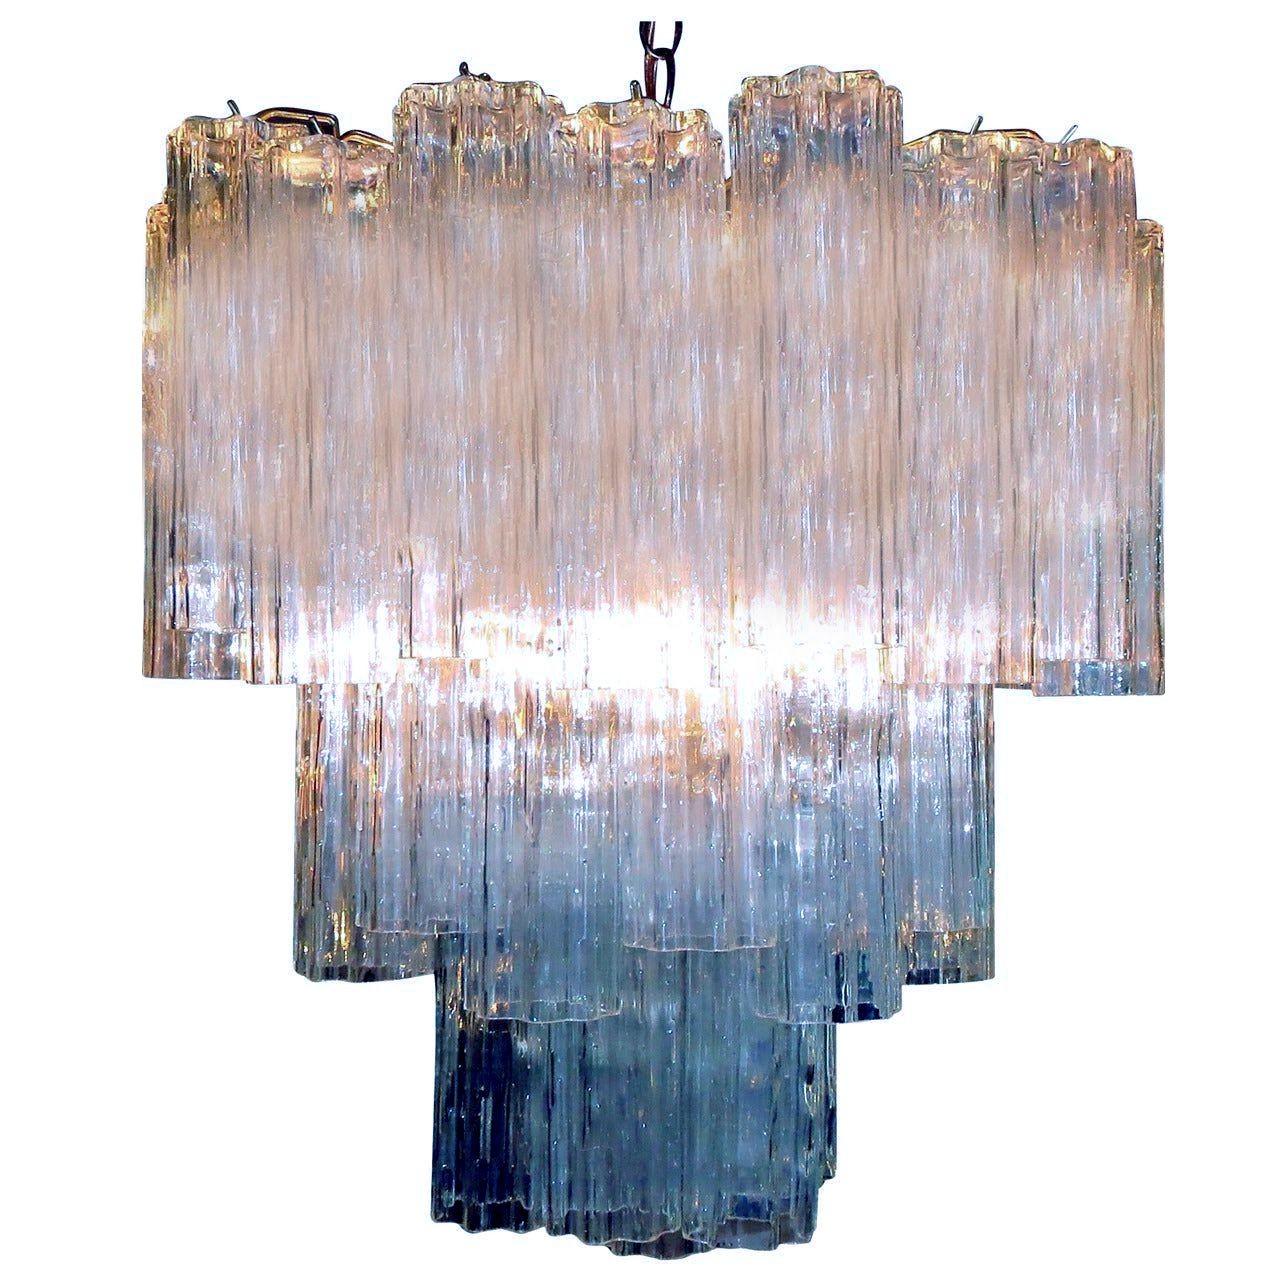 Murano Glass Tronchi Pendant Chandelier by Venini In Excellent Condition For Sale In Van Nuys, CA